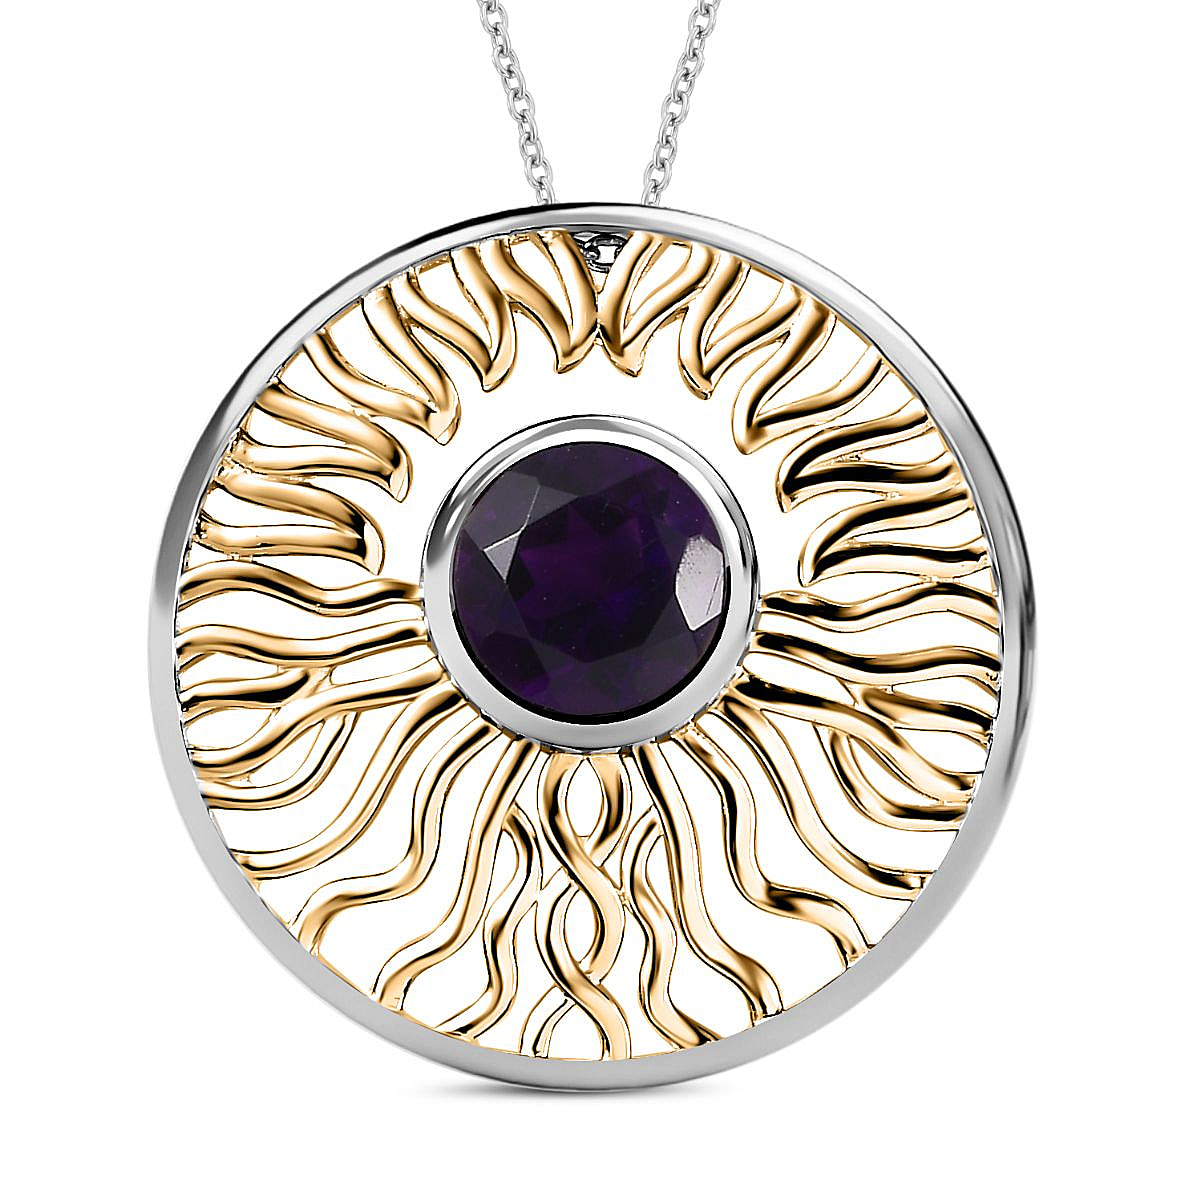 Moroccan Amethyst Solitaire Pendant with Chain (Size 20) in 18K Yellow Gold Vermeil & Platinum Plated Sterling Silver 1.90 Ct, Silver Wt. 6.60 GM